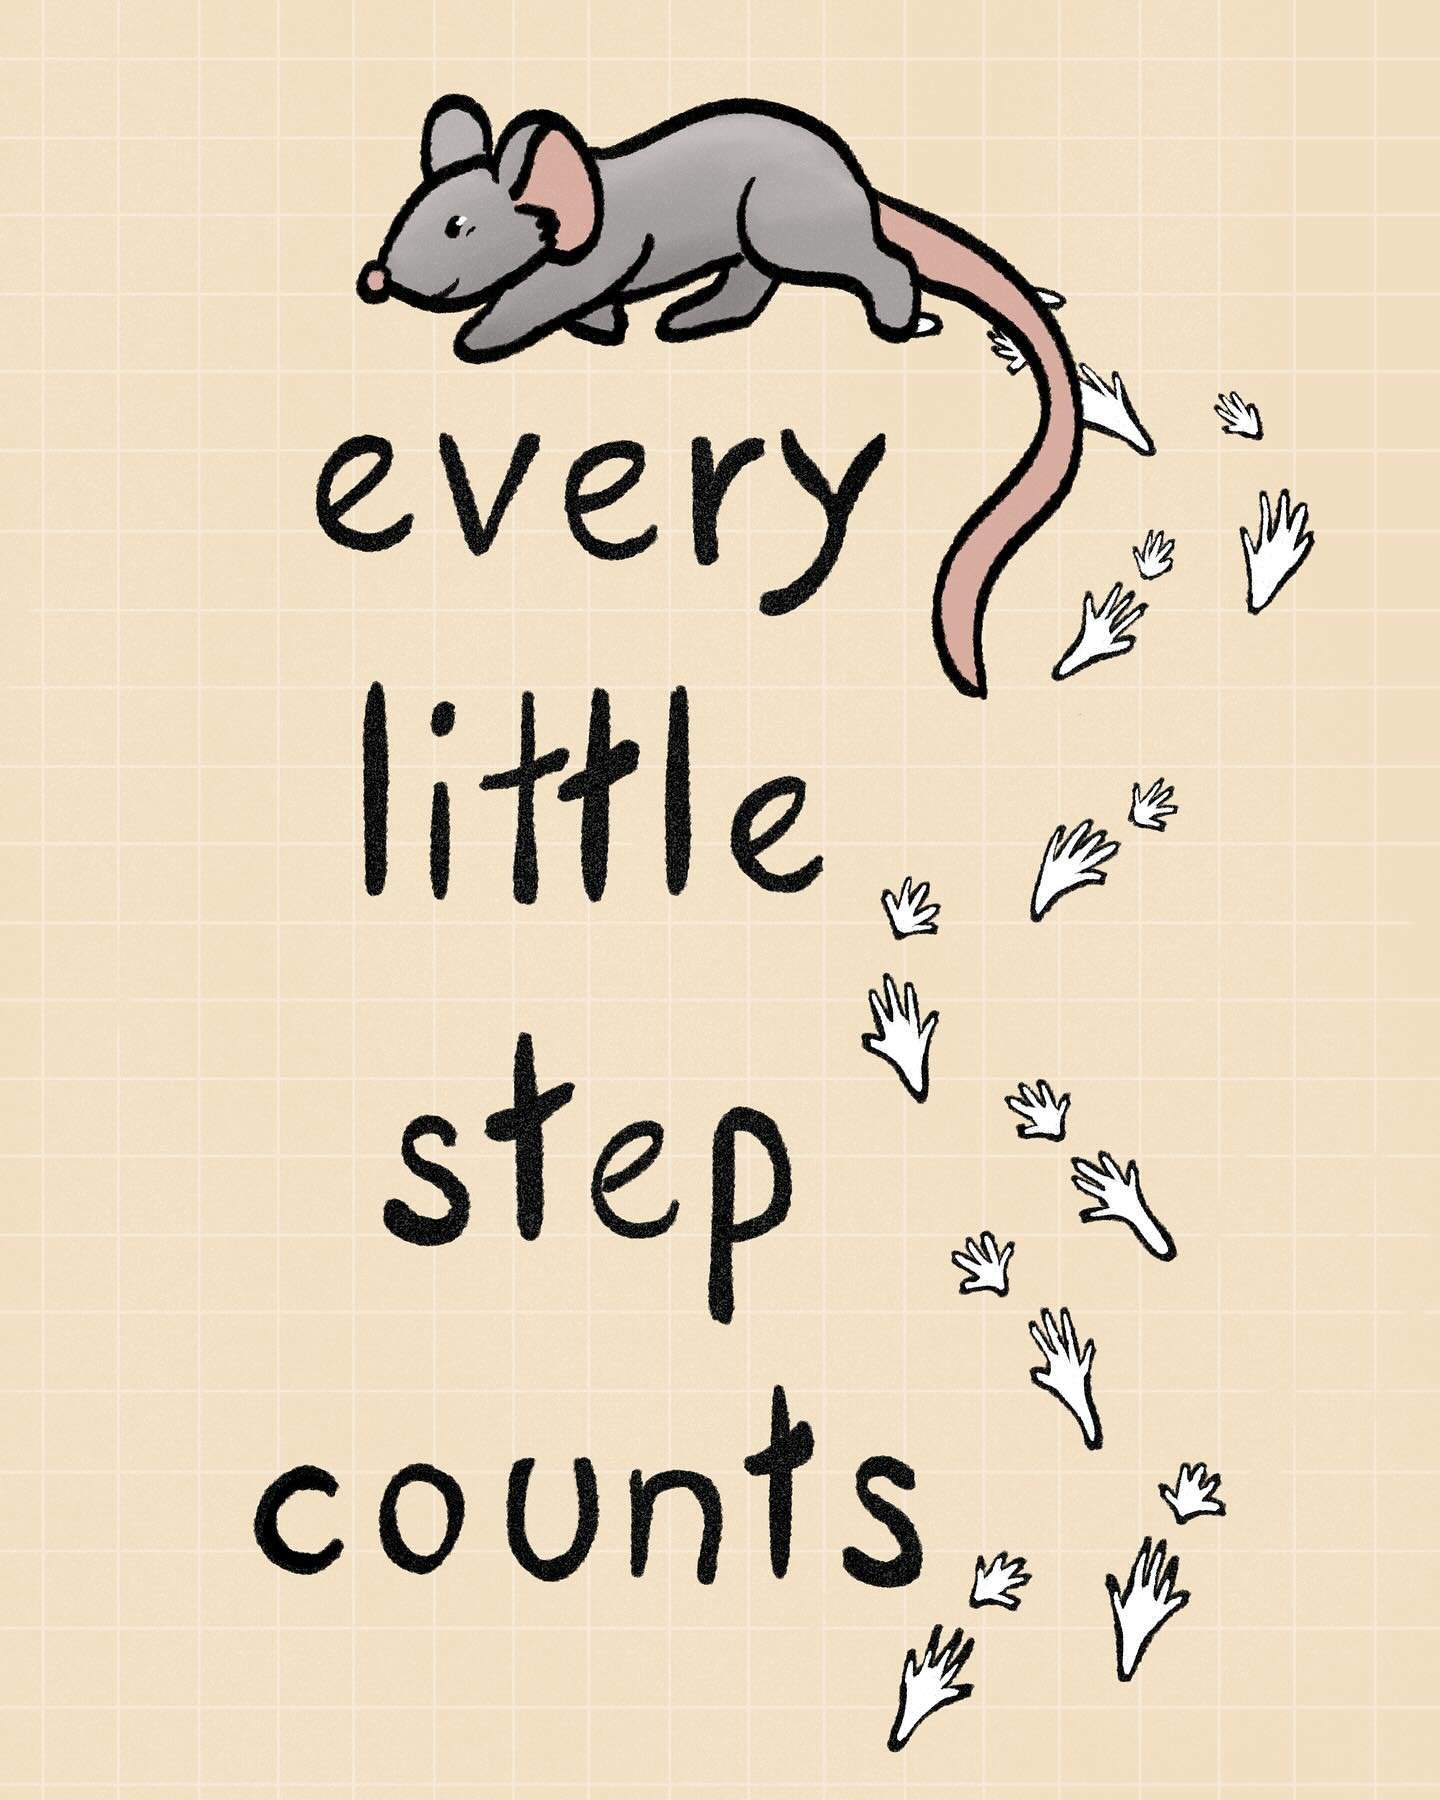 #makersmay Week three! Motivational quote. I&rsquo;m always reminding myself each little thing I do no matter how small is still a step and still important. 

#mouse #motivation #motivationalquote #inspiration #dailyart #arteveryday #digitalart #quot